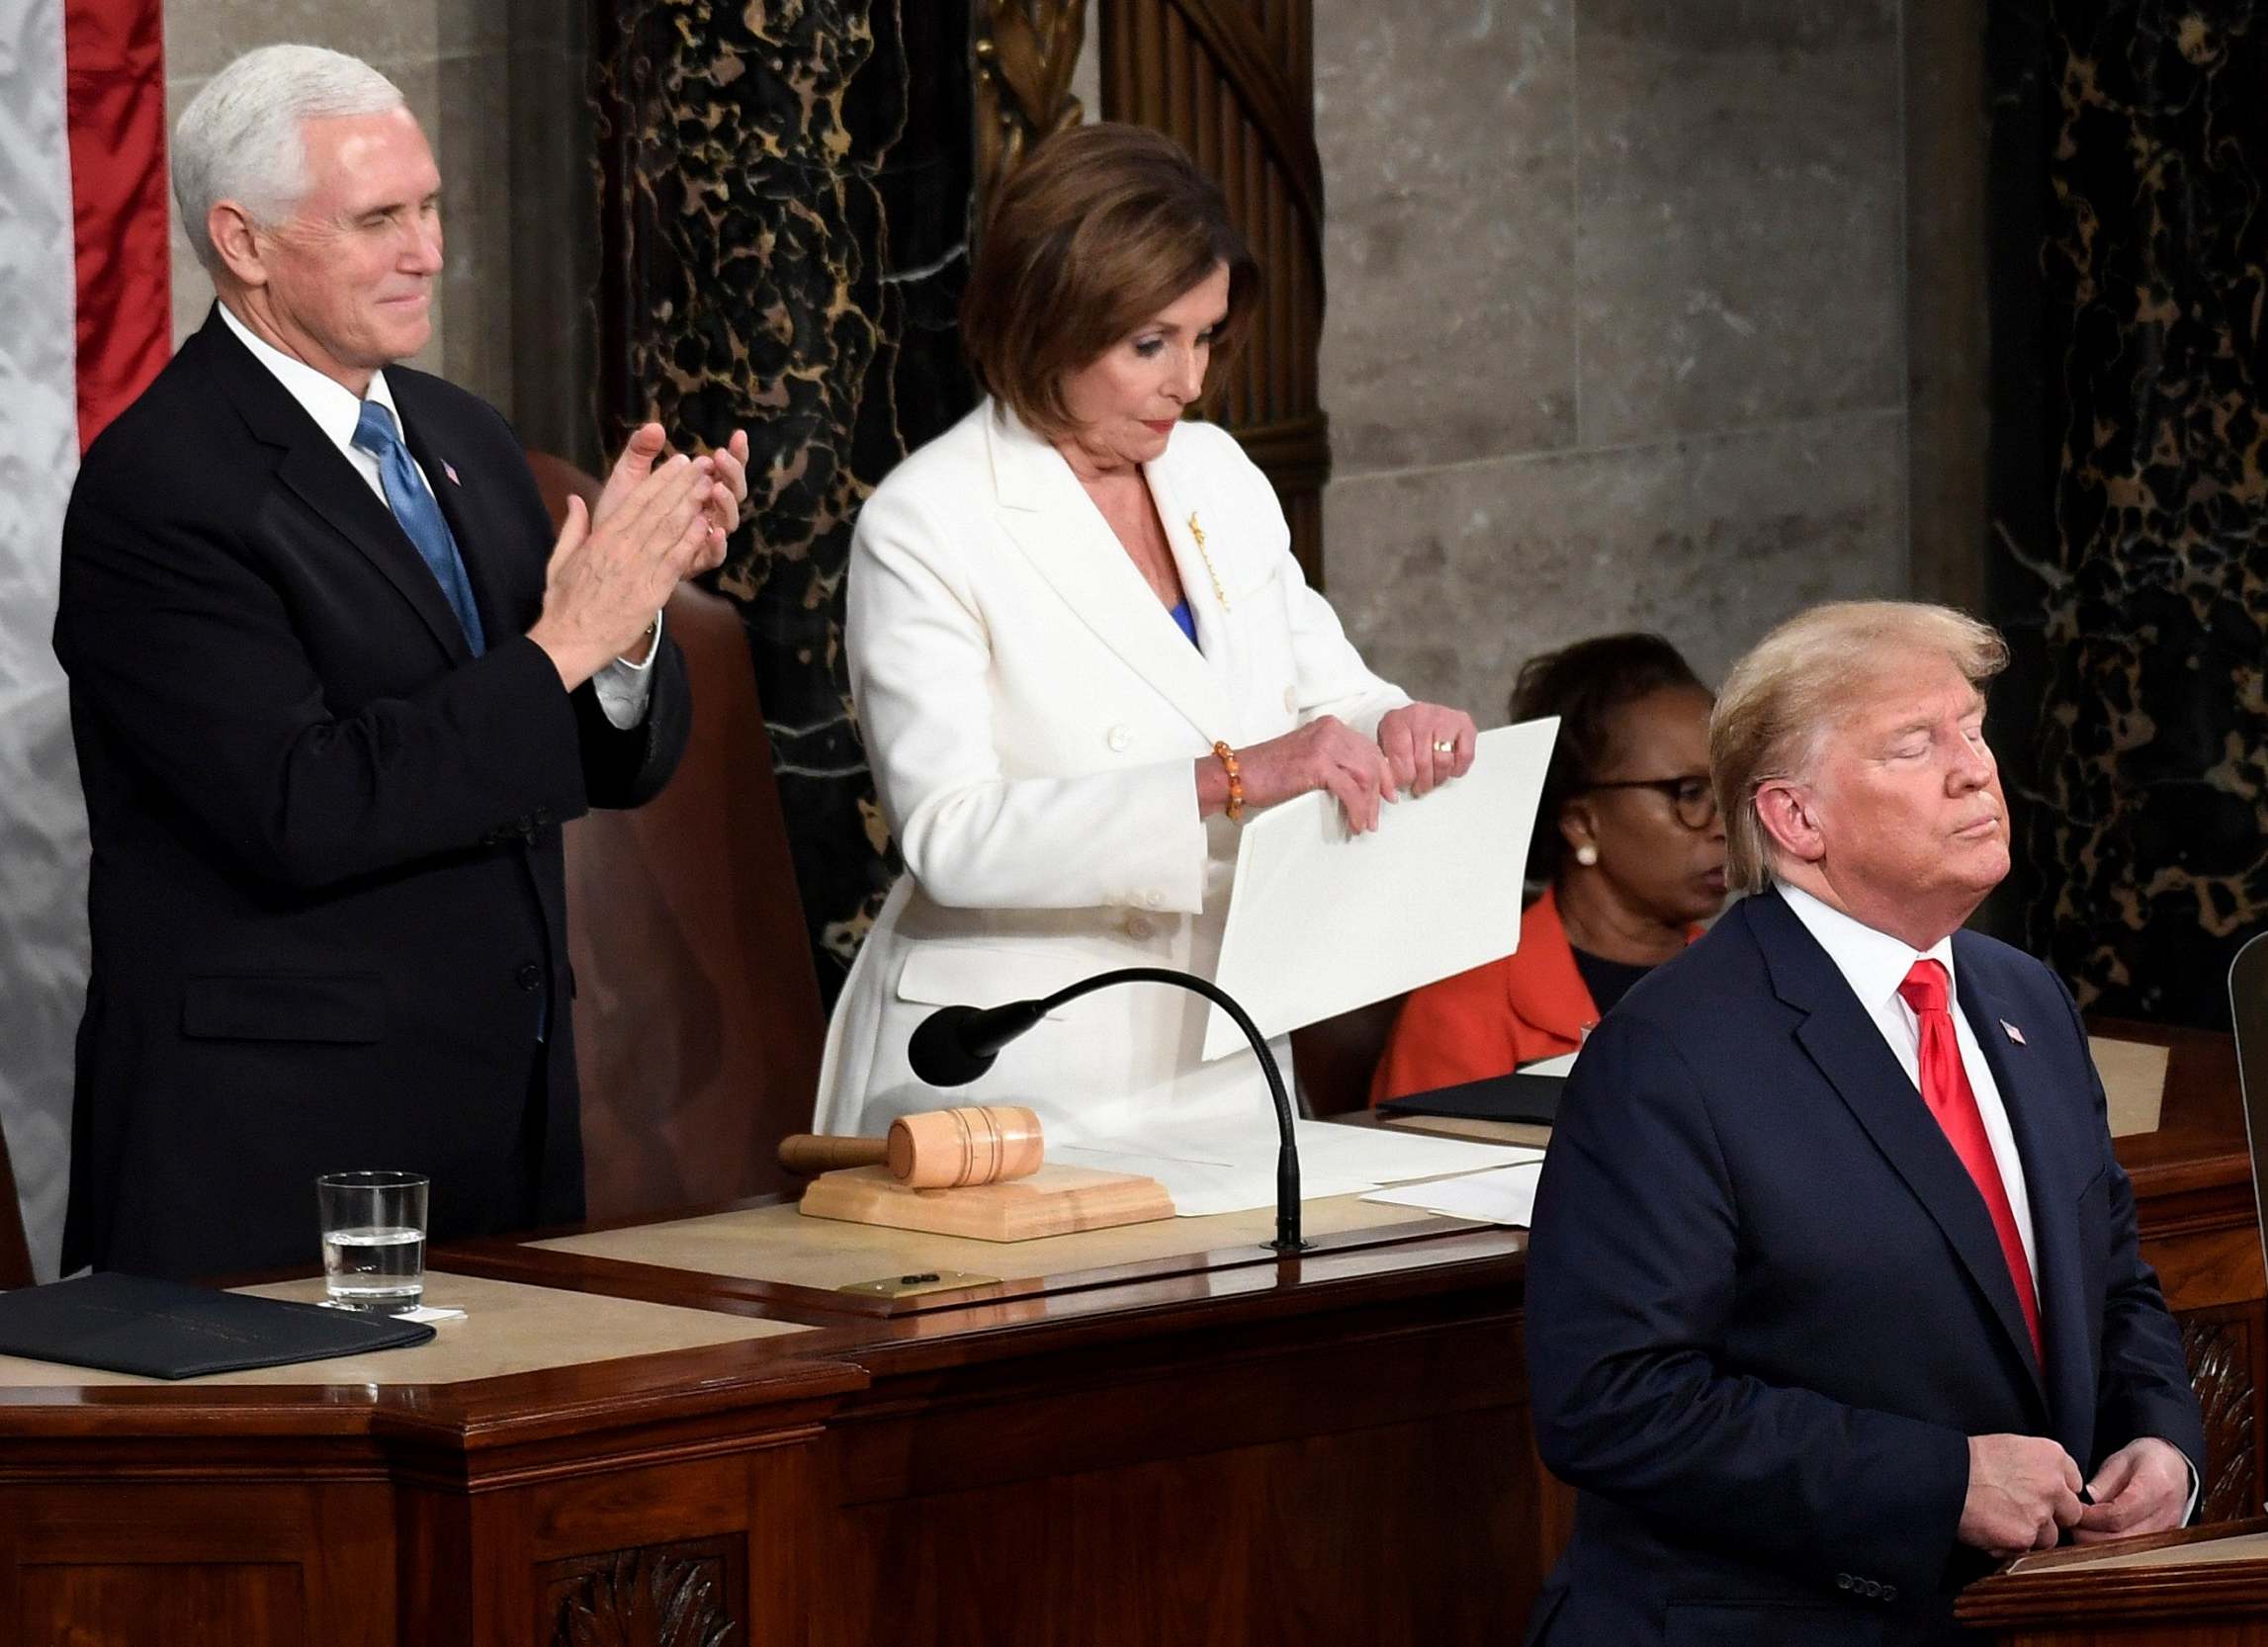 That’s torn it ... Pence applauds as Pelosi tears up Trump’s State of the Union address